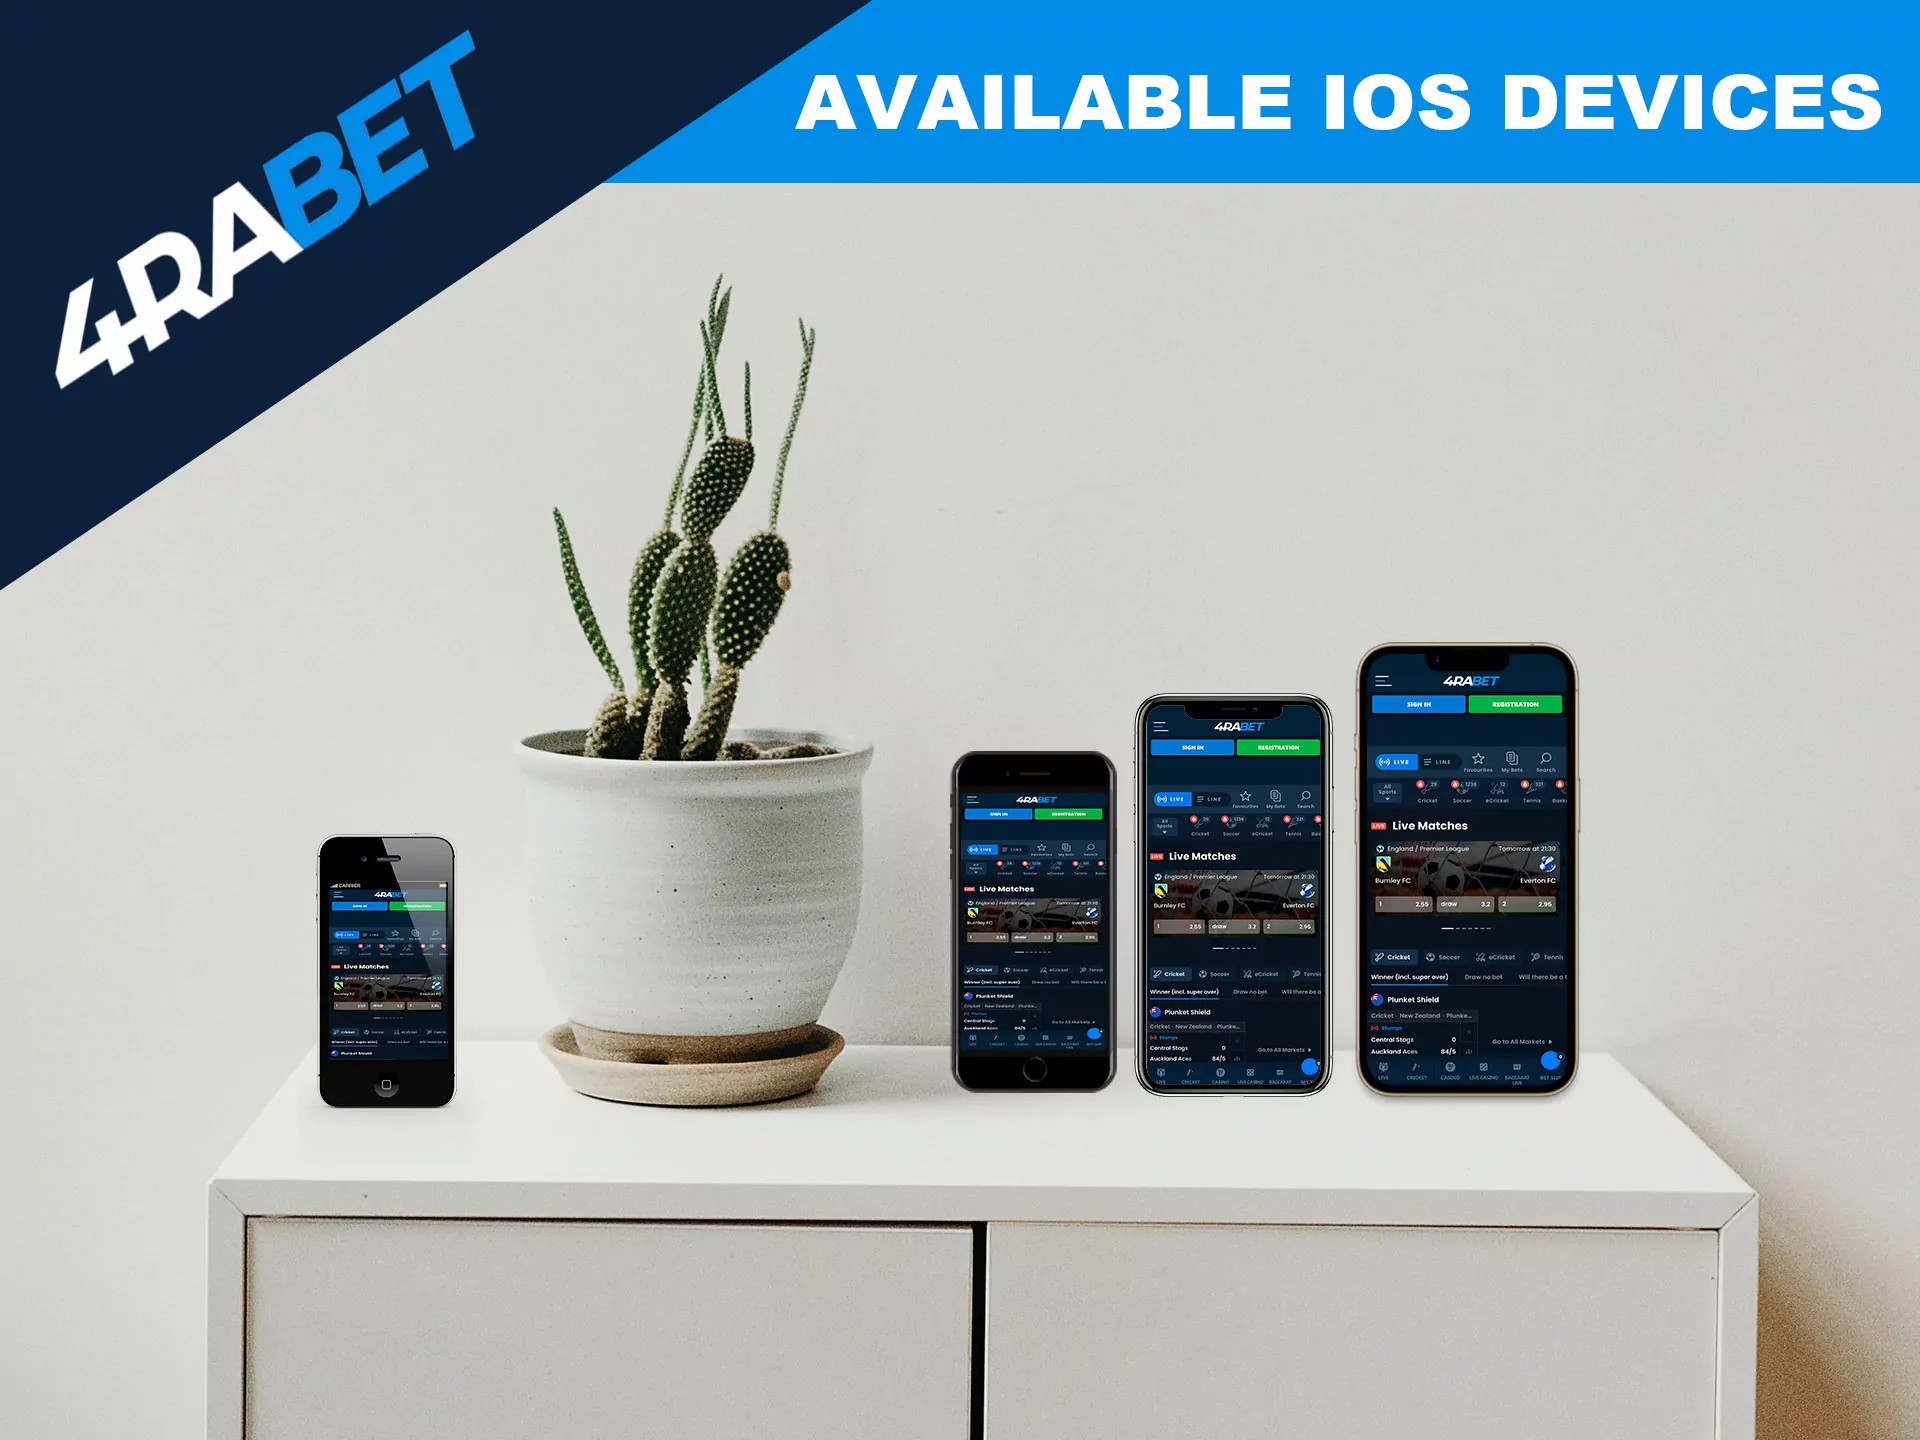 Available iPhones to install the 4rabet application.